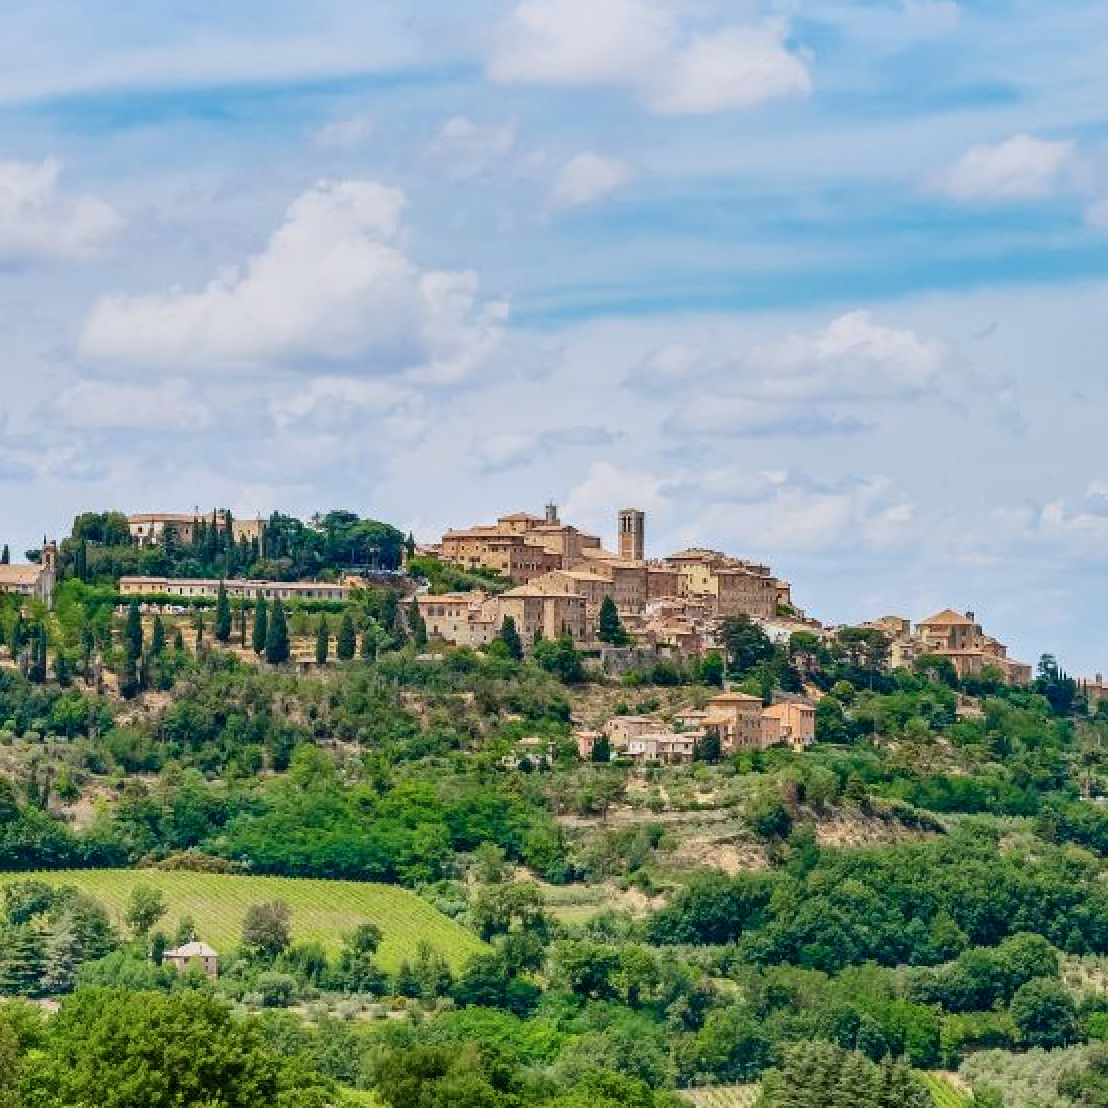 Tuscany Day Trip to Montepulciano and Pienza